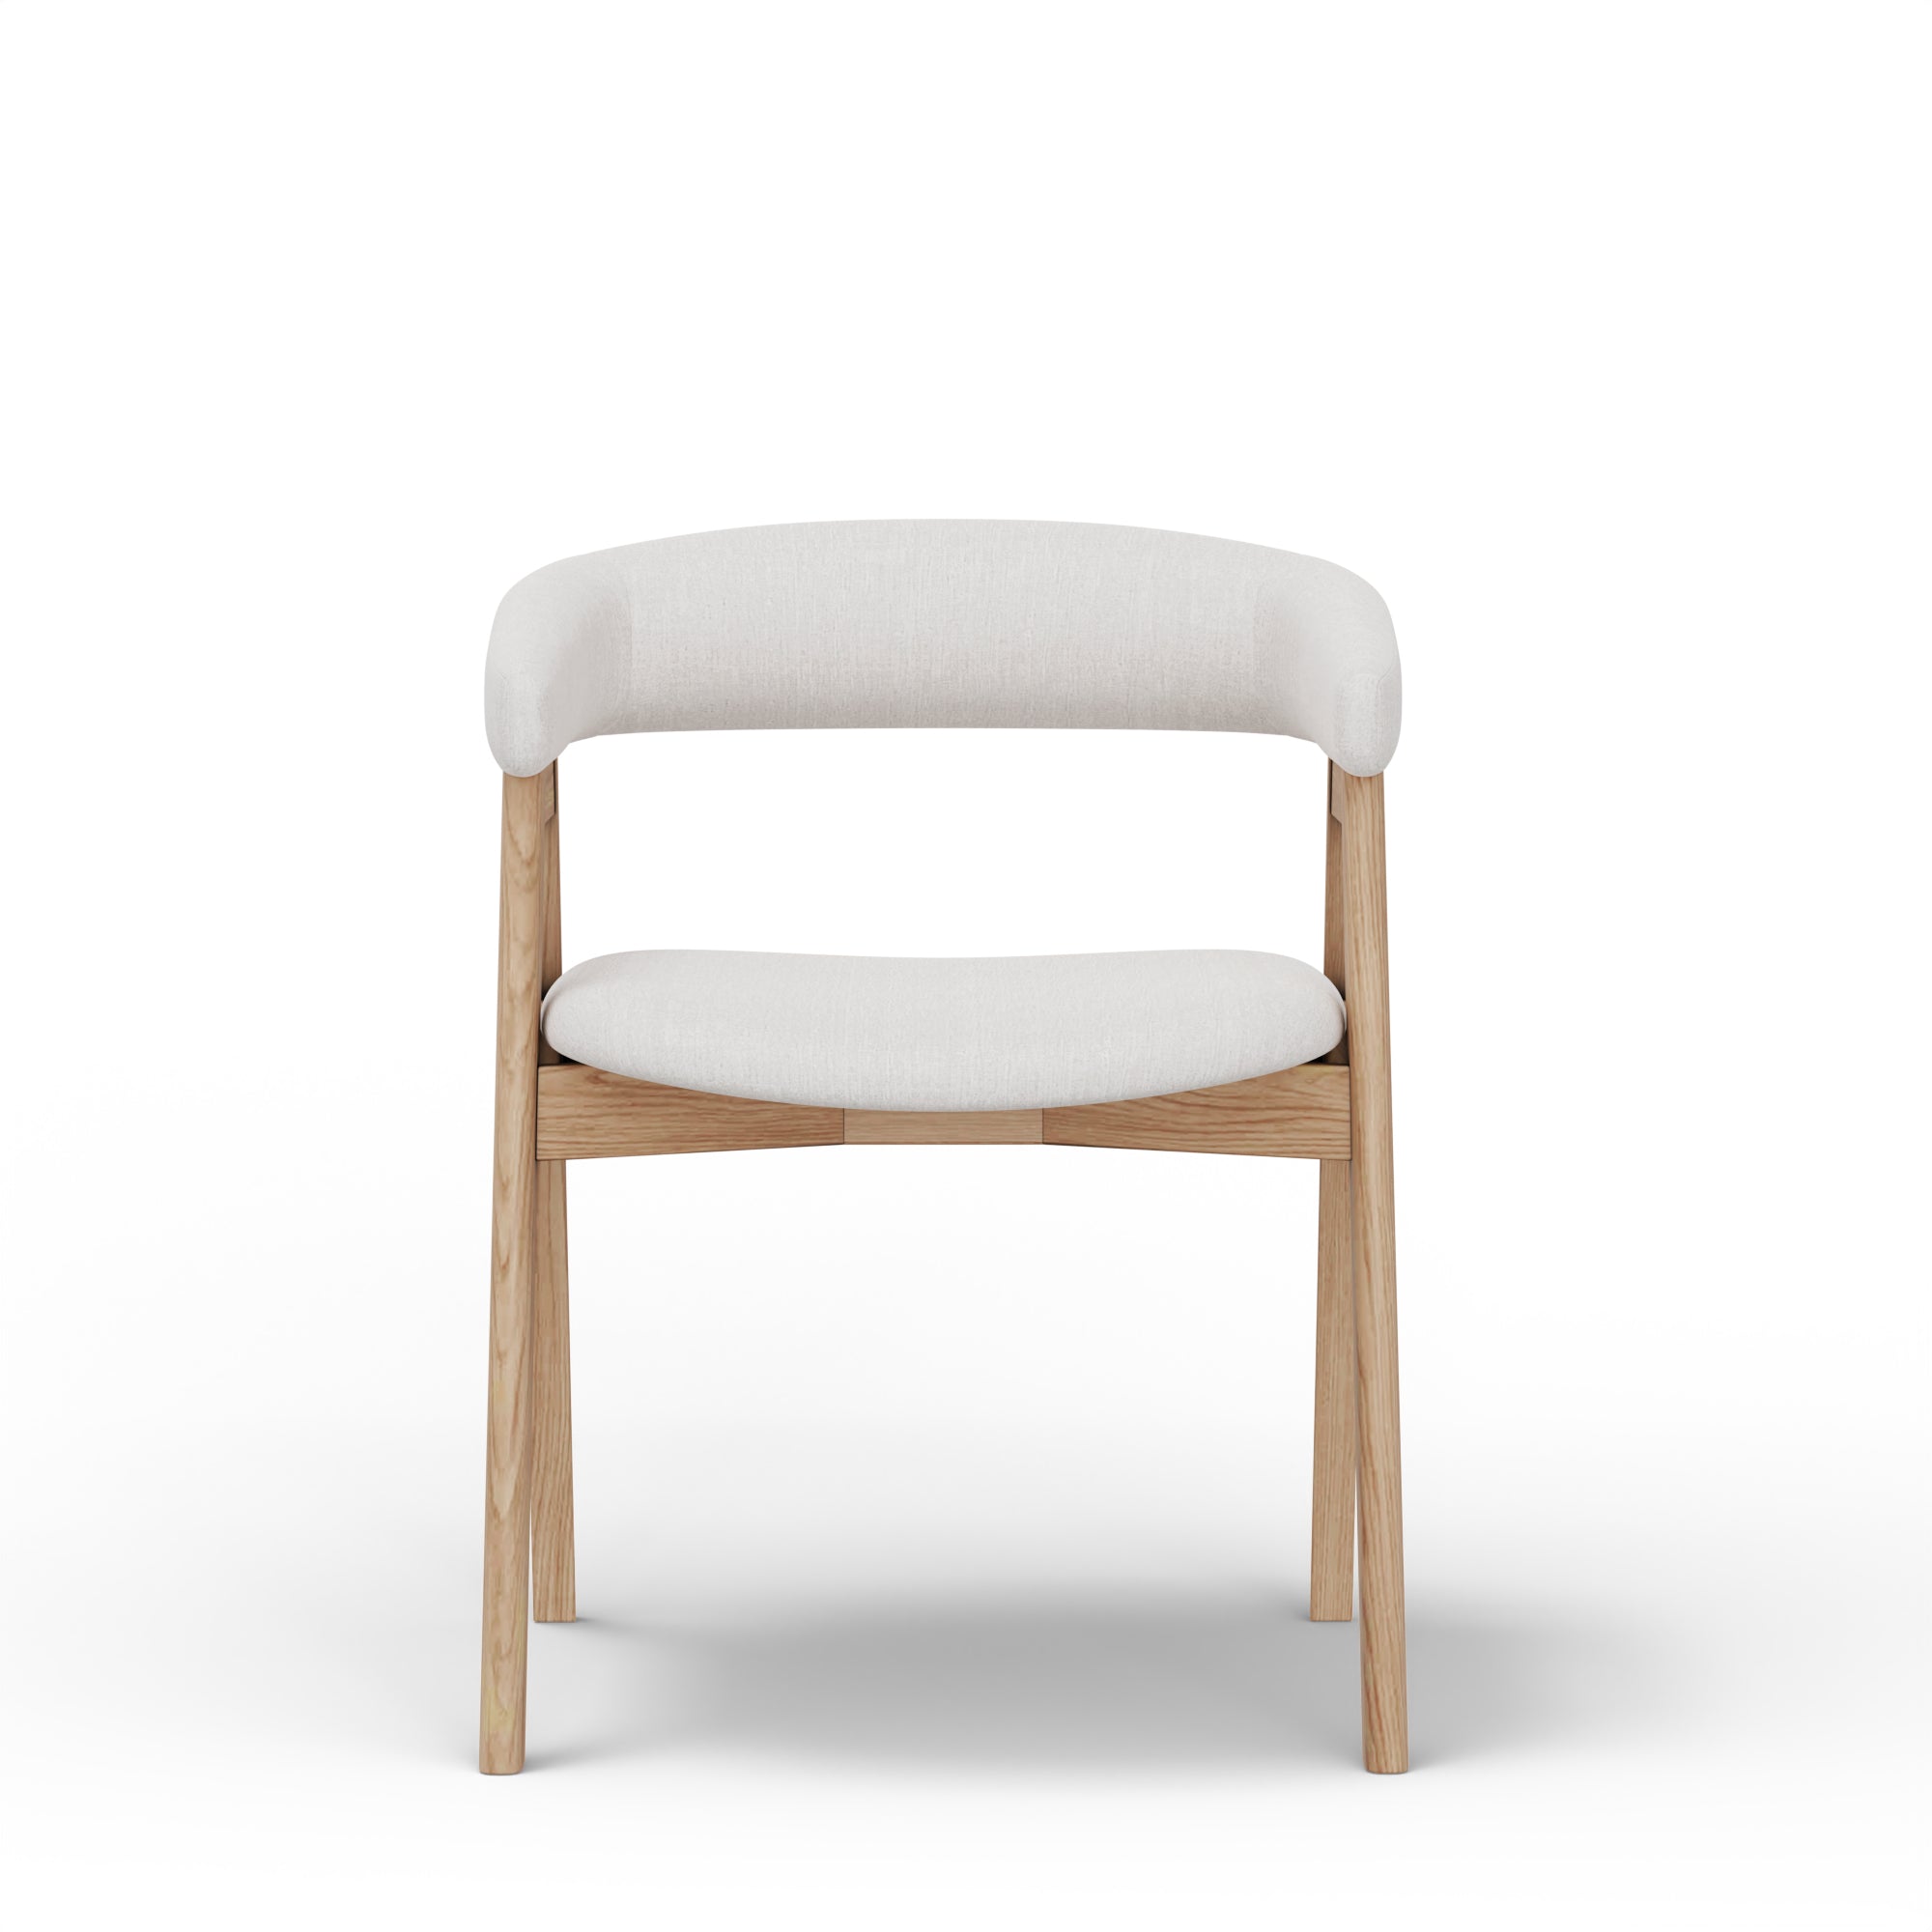 Cove Curved Back Dining Chair - Natural